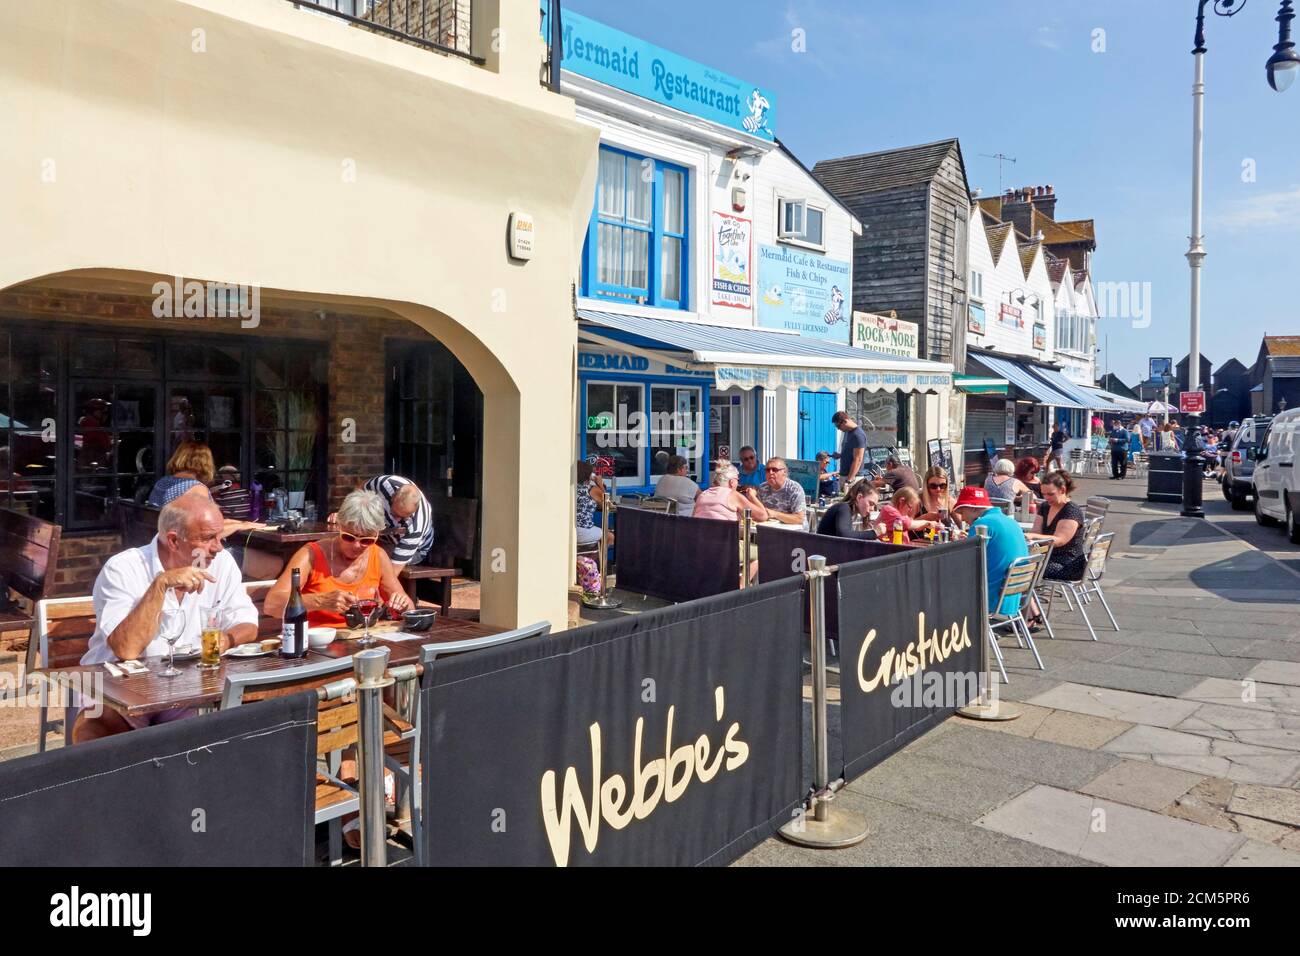 Hastings Webbe's seafront restaurant and seafront cafes, Rock-a-Nore Road, Old Town, East Sussex, UK Stock Photo